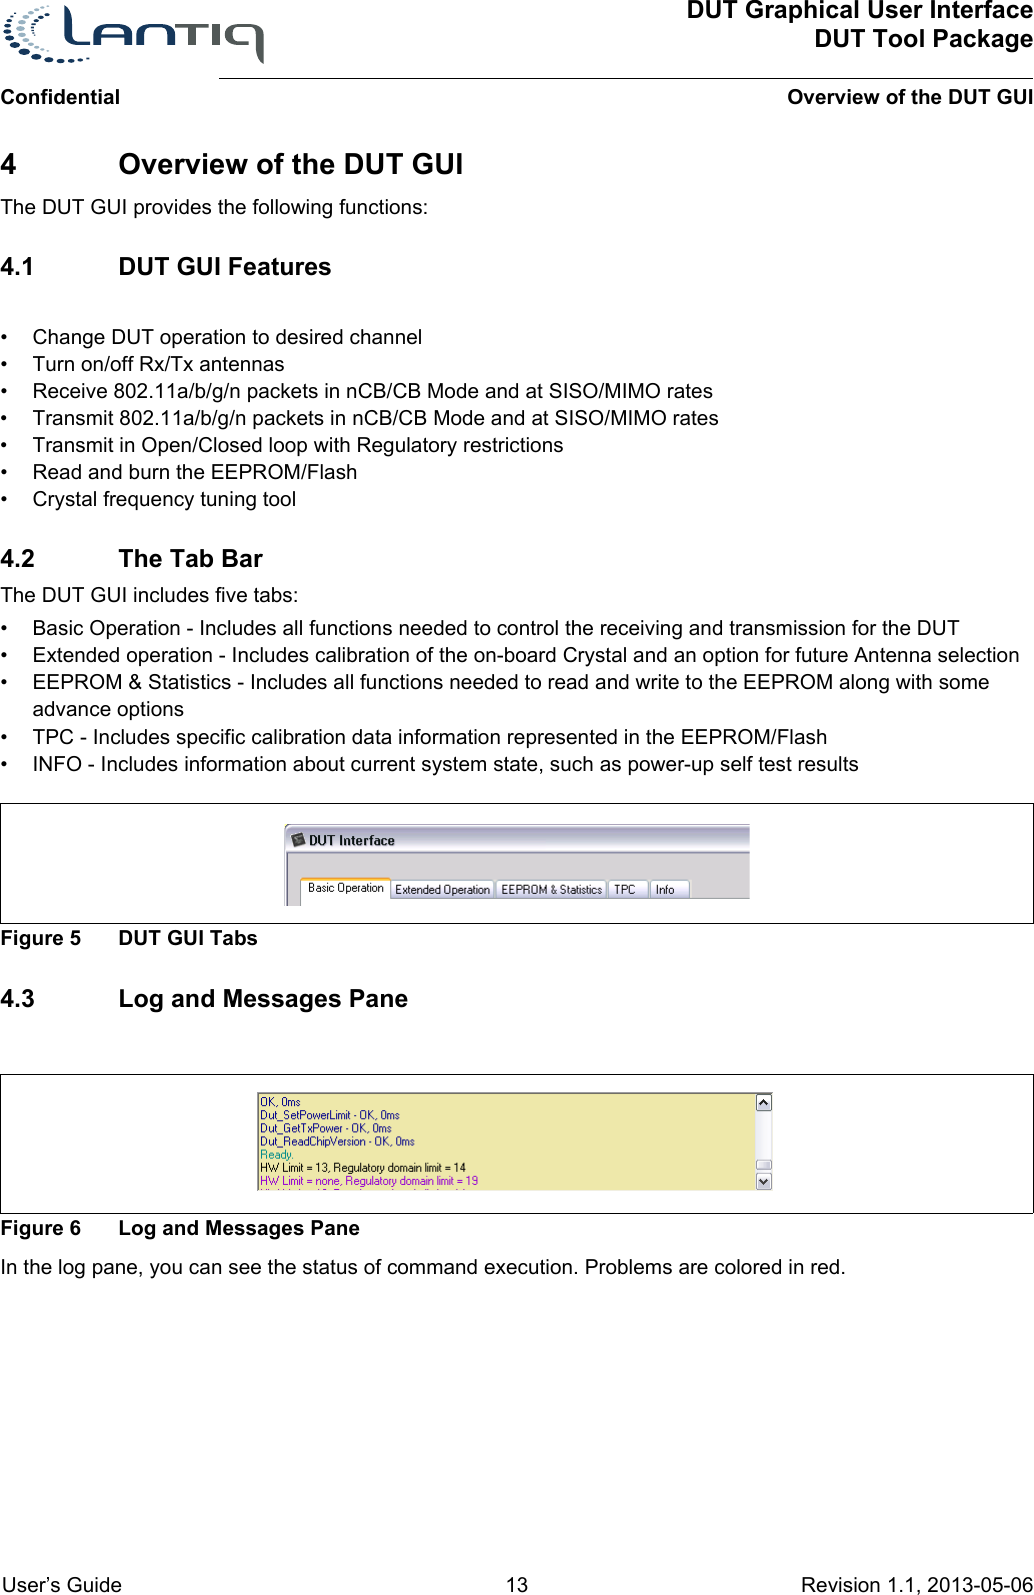 DUT Graphical User InterfaceDUT Tool PackageOverview of the DUT GUIConfidential User’s Guide 13 Revision 1.1, 2013-05-06      4 Overview of the DUT GUIThe DUT GUI provides the following functions:4.1 DUT GUI Features• Change DUT operation to desired channel• Turn on/off Rx/Tx antennas• Receive 802.11a/b/g/n packets in nCB/CB Mode and at SISO/MIMO rates• Transmit 802.11a/b/g/n packets in nCB/CB Mode and at SISO/MIMO rates• Transmit in Open/Closed loop with Regulatory restrictions• Read and burn the EEPROM/Flash• Crystal frequency tuning tool4.2 The Tab BarThe DUT GUI includes five tabs:• Basic Operation - Includes all functions needed to control the receiving and transmission for the DUT• Extended operation - Includes calibration of the on-board Crystal and an option for future Antenna selection • EEPROM &amp; Statistics - Includes all functions needed to read and write to the EEPROM along with some advance options• TPC - Includes specific calibration data information represented in the EEPROM/Flash• INFO - Includes information about current system state, such as power-up self test resultsFigure 5 DUT GUI Tabs4.3 Log and Messages PaneFigure 6 Log and Messages PaneIn the log pane, you can see the status of command execution. Problems are colored in red. 